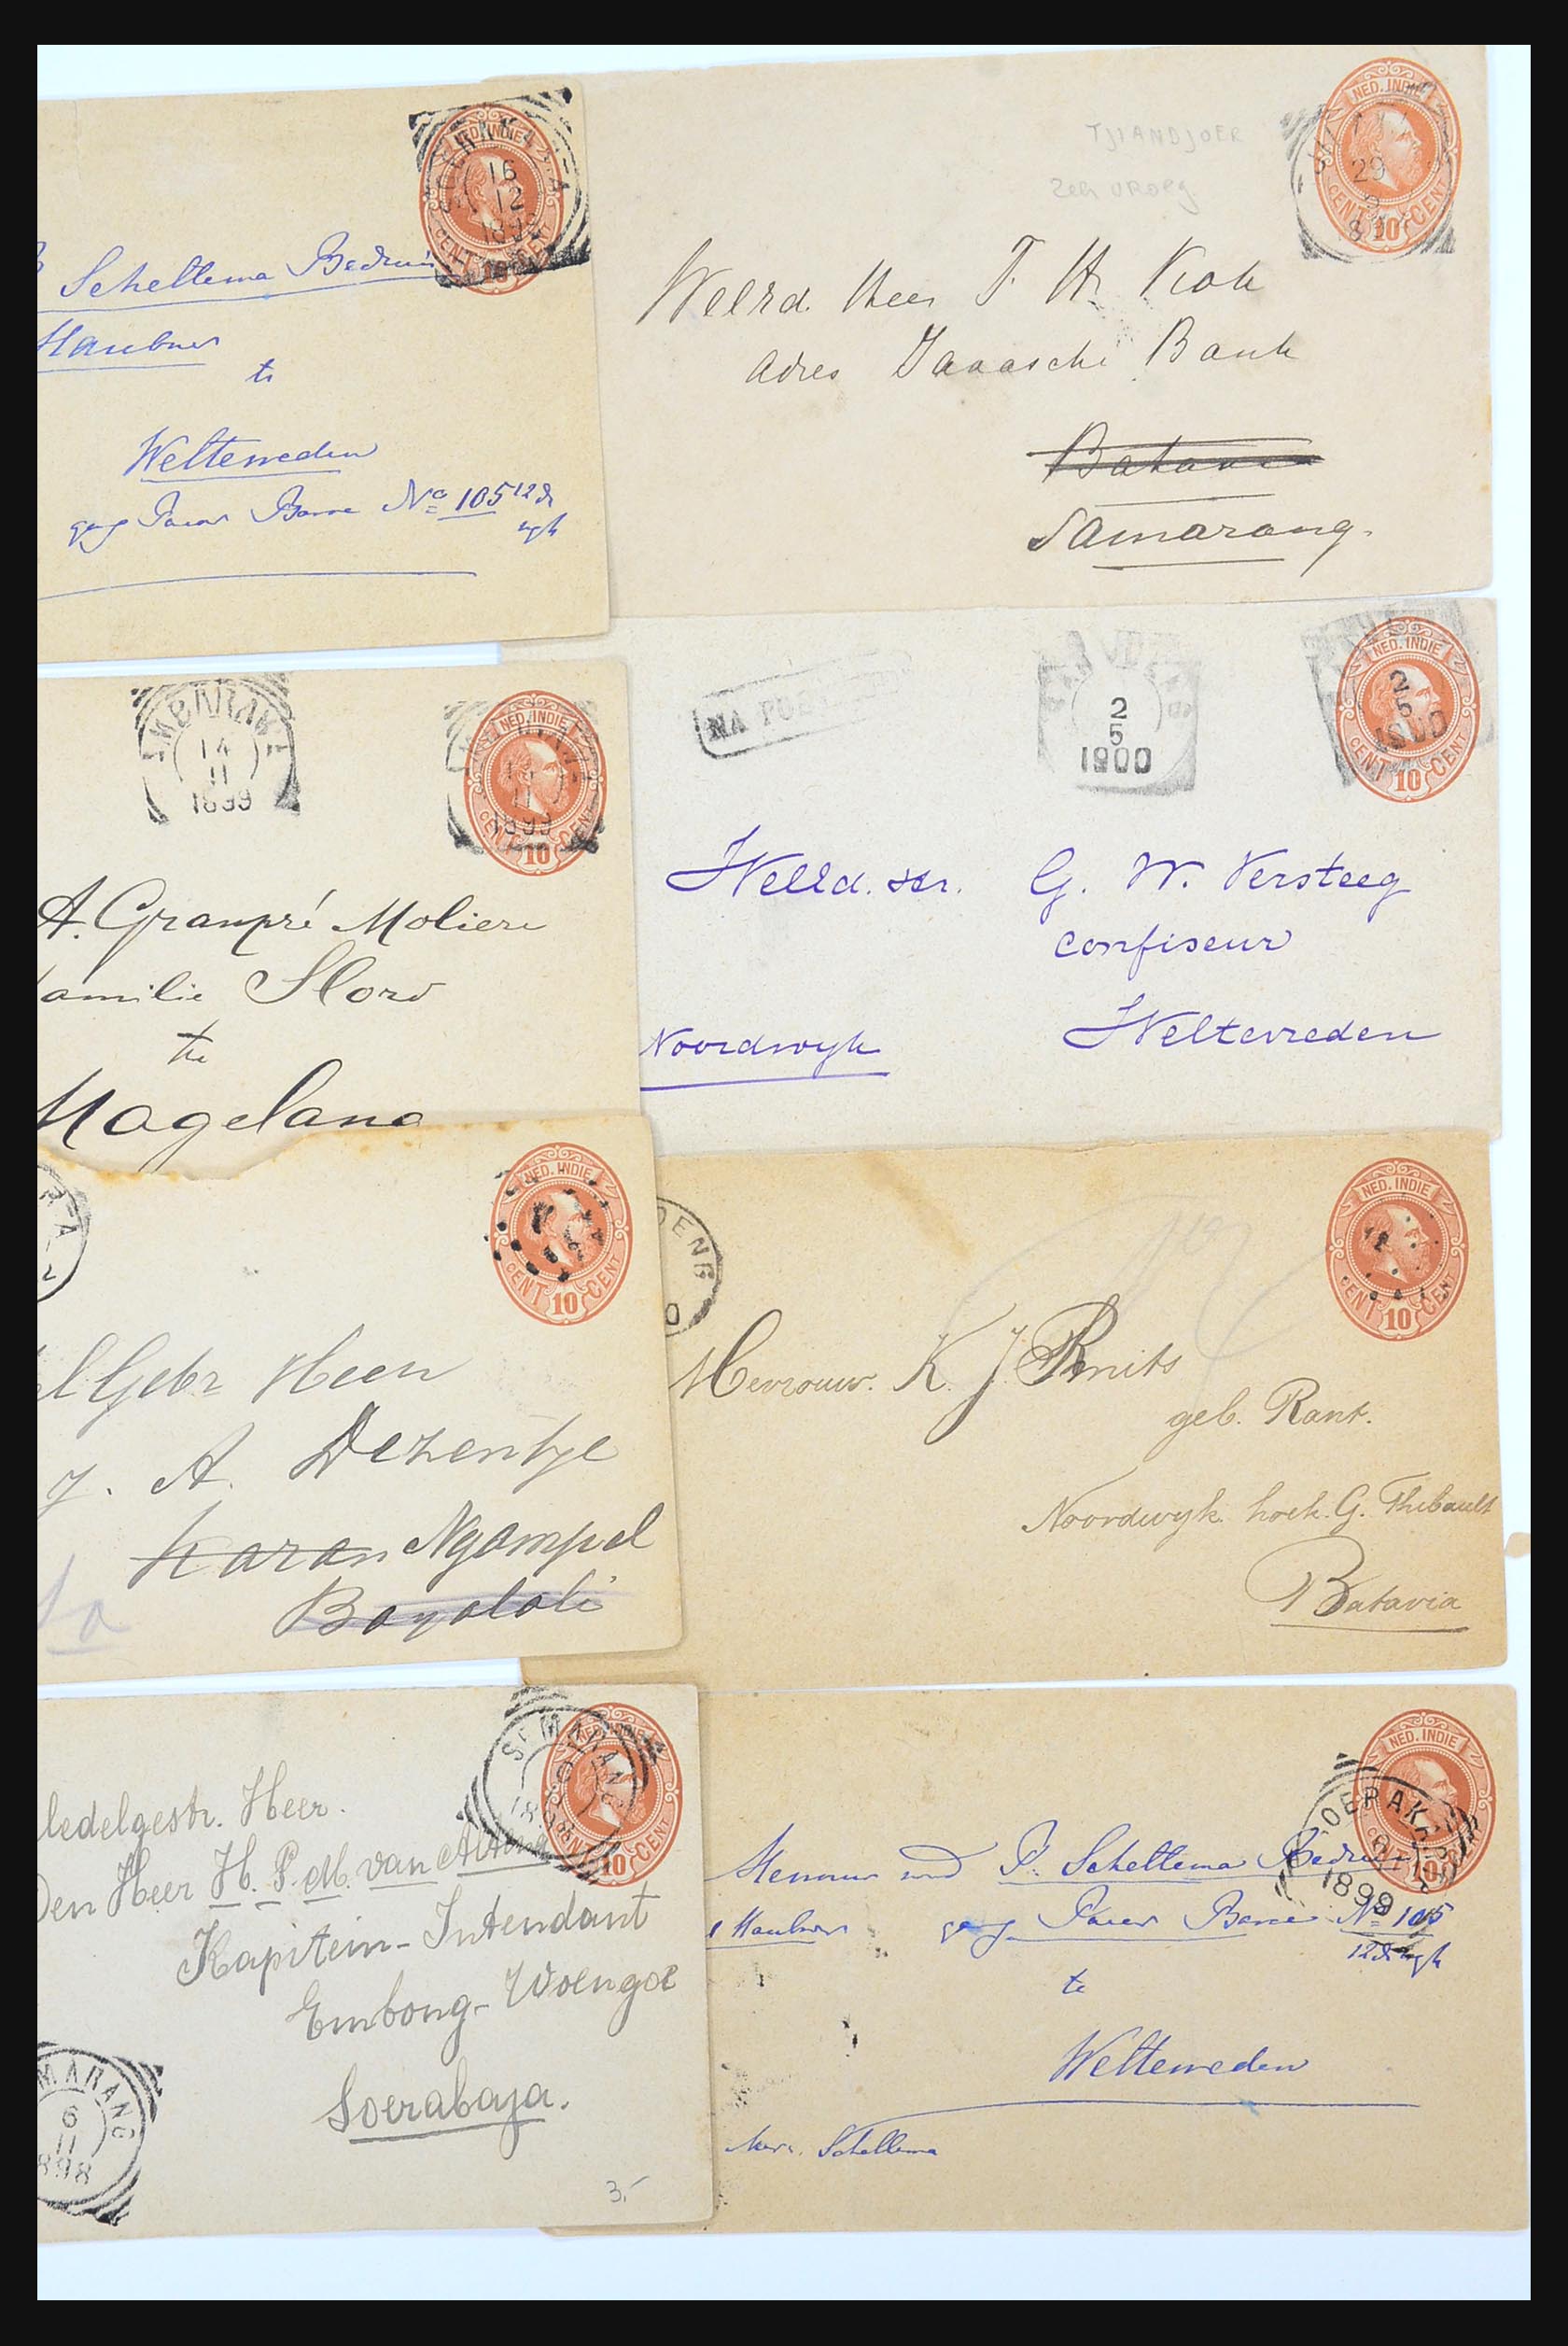 31361 024 - 31361 Netherlands Indies covers 1880-1950.